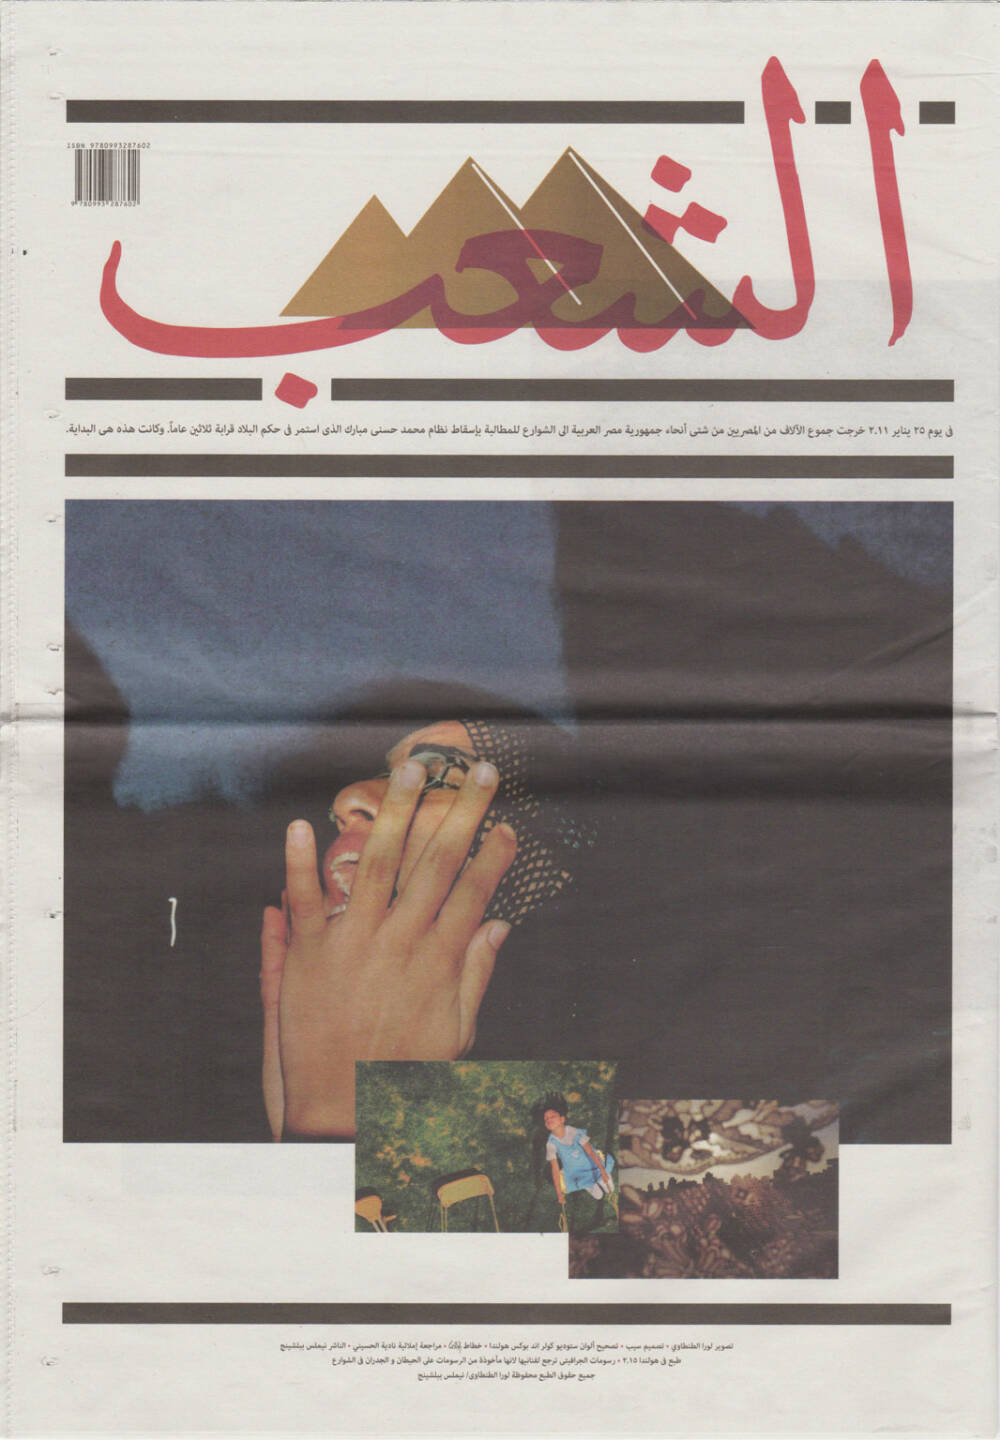 Laura El-Tantawy - The People, Self published 2015, Cover - http://josefchladek.com/book/laura_el-tantawy_-_the_people